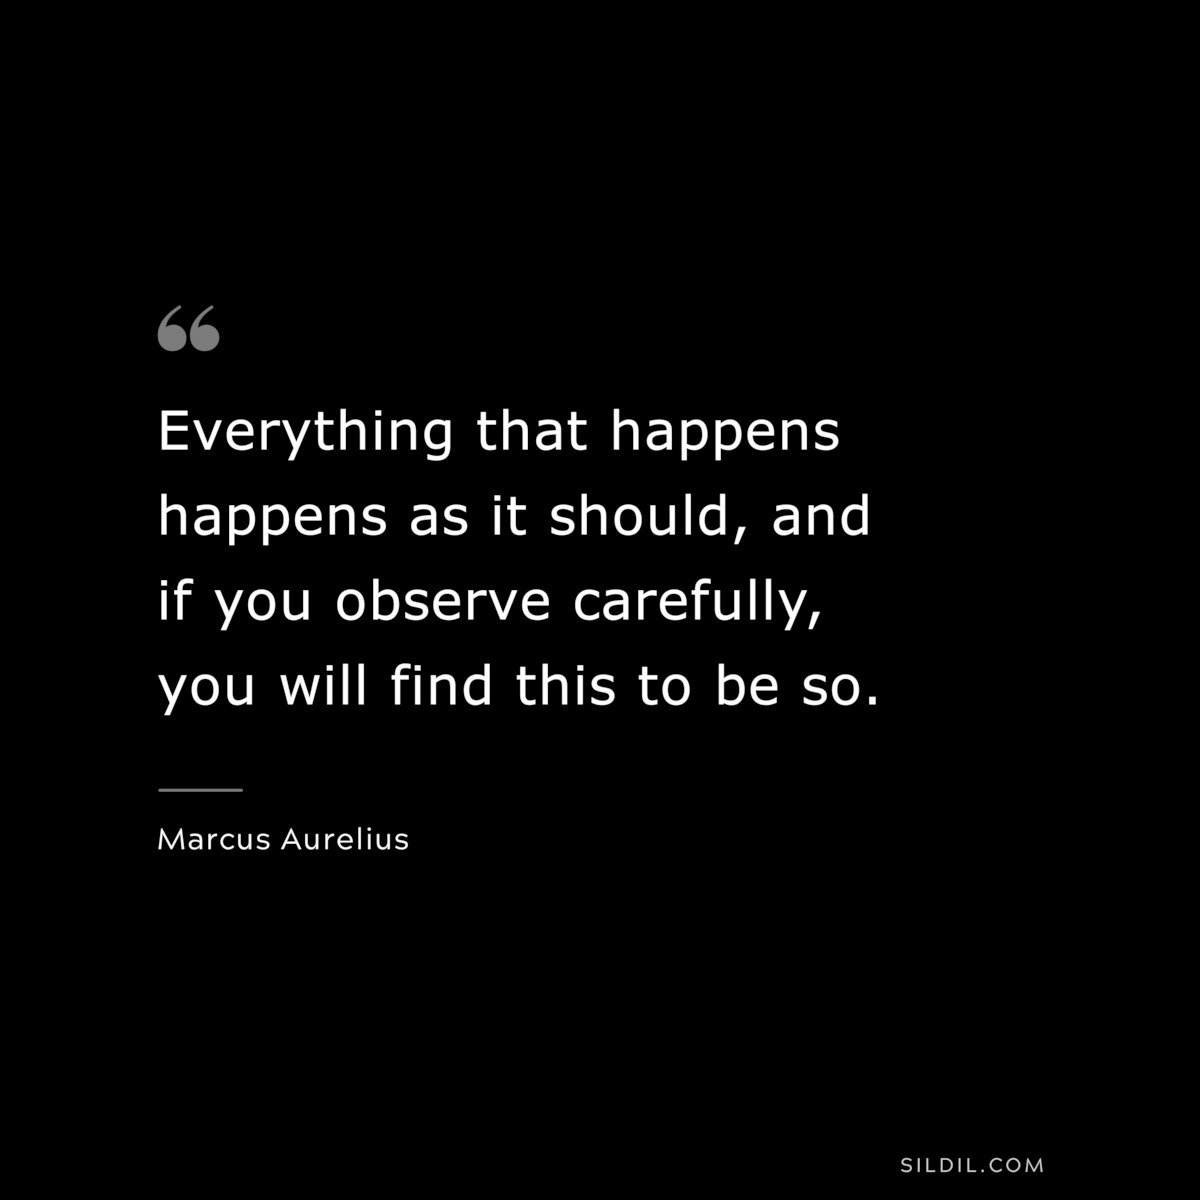 Everything that happens happens as it should, and if you observe carefully, you will find this to be so. ― Marcus Aurelius